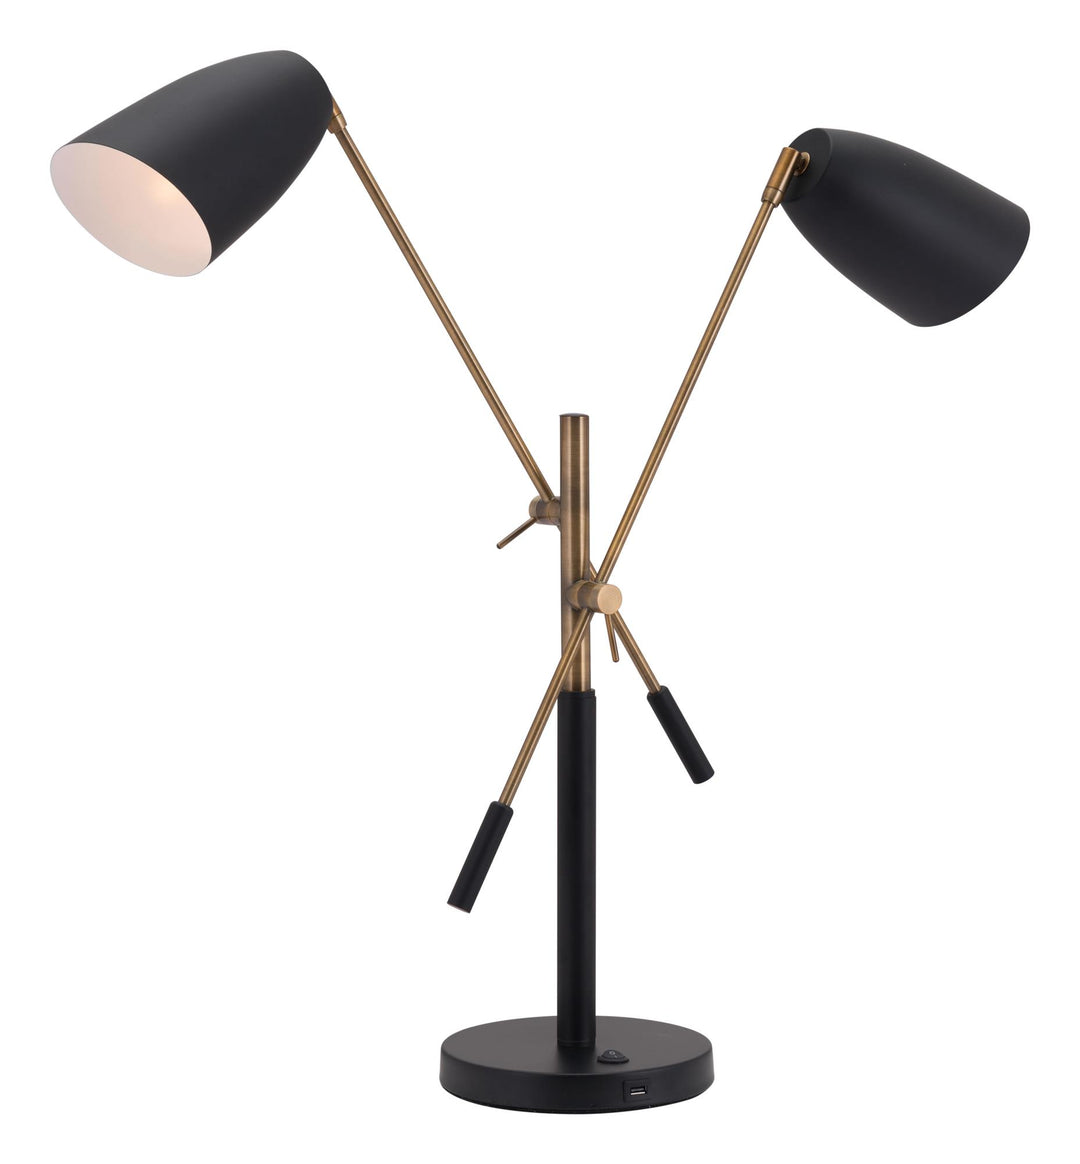 Stylish table lamp with rockable switch by Tammie -  N/A